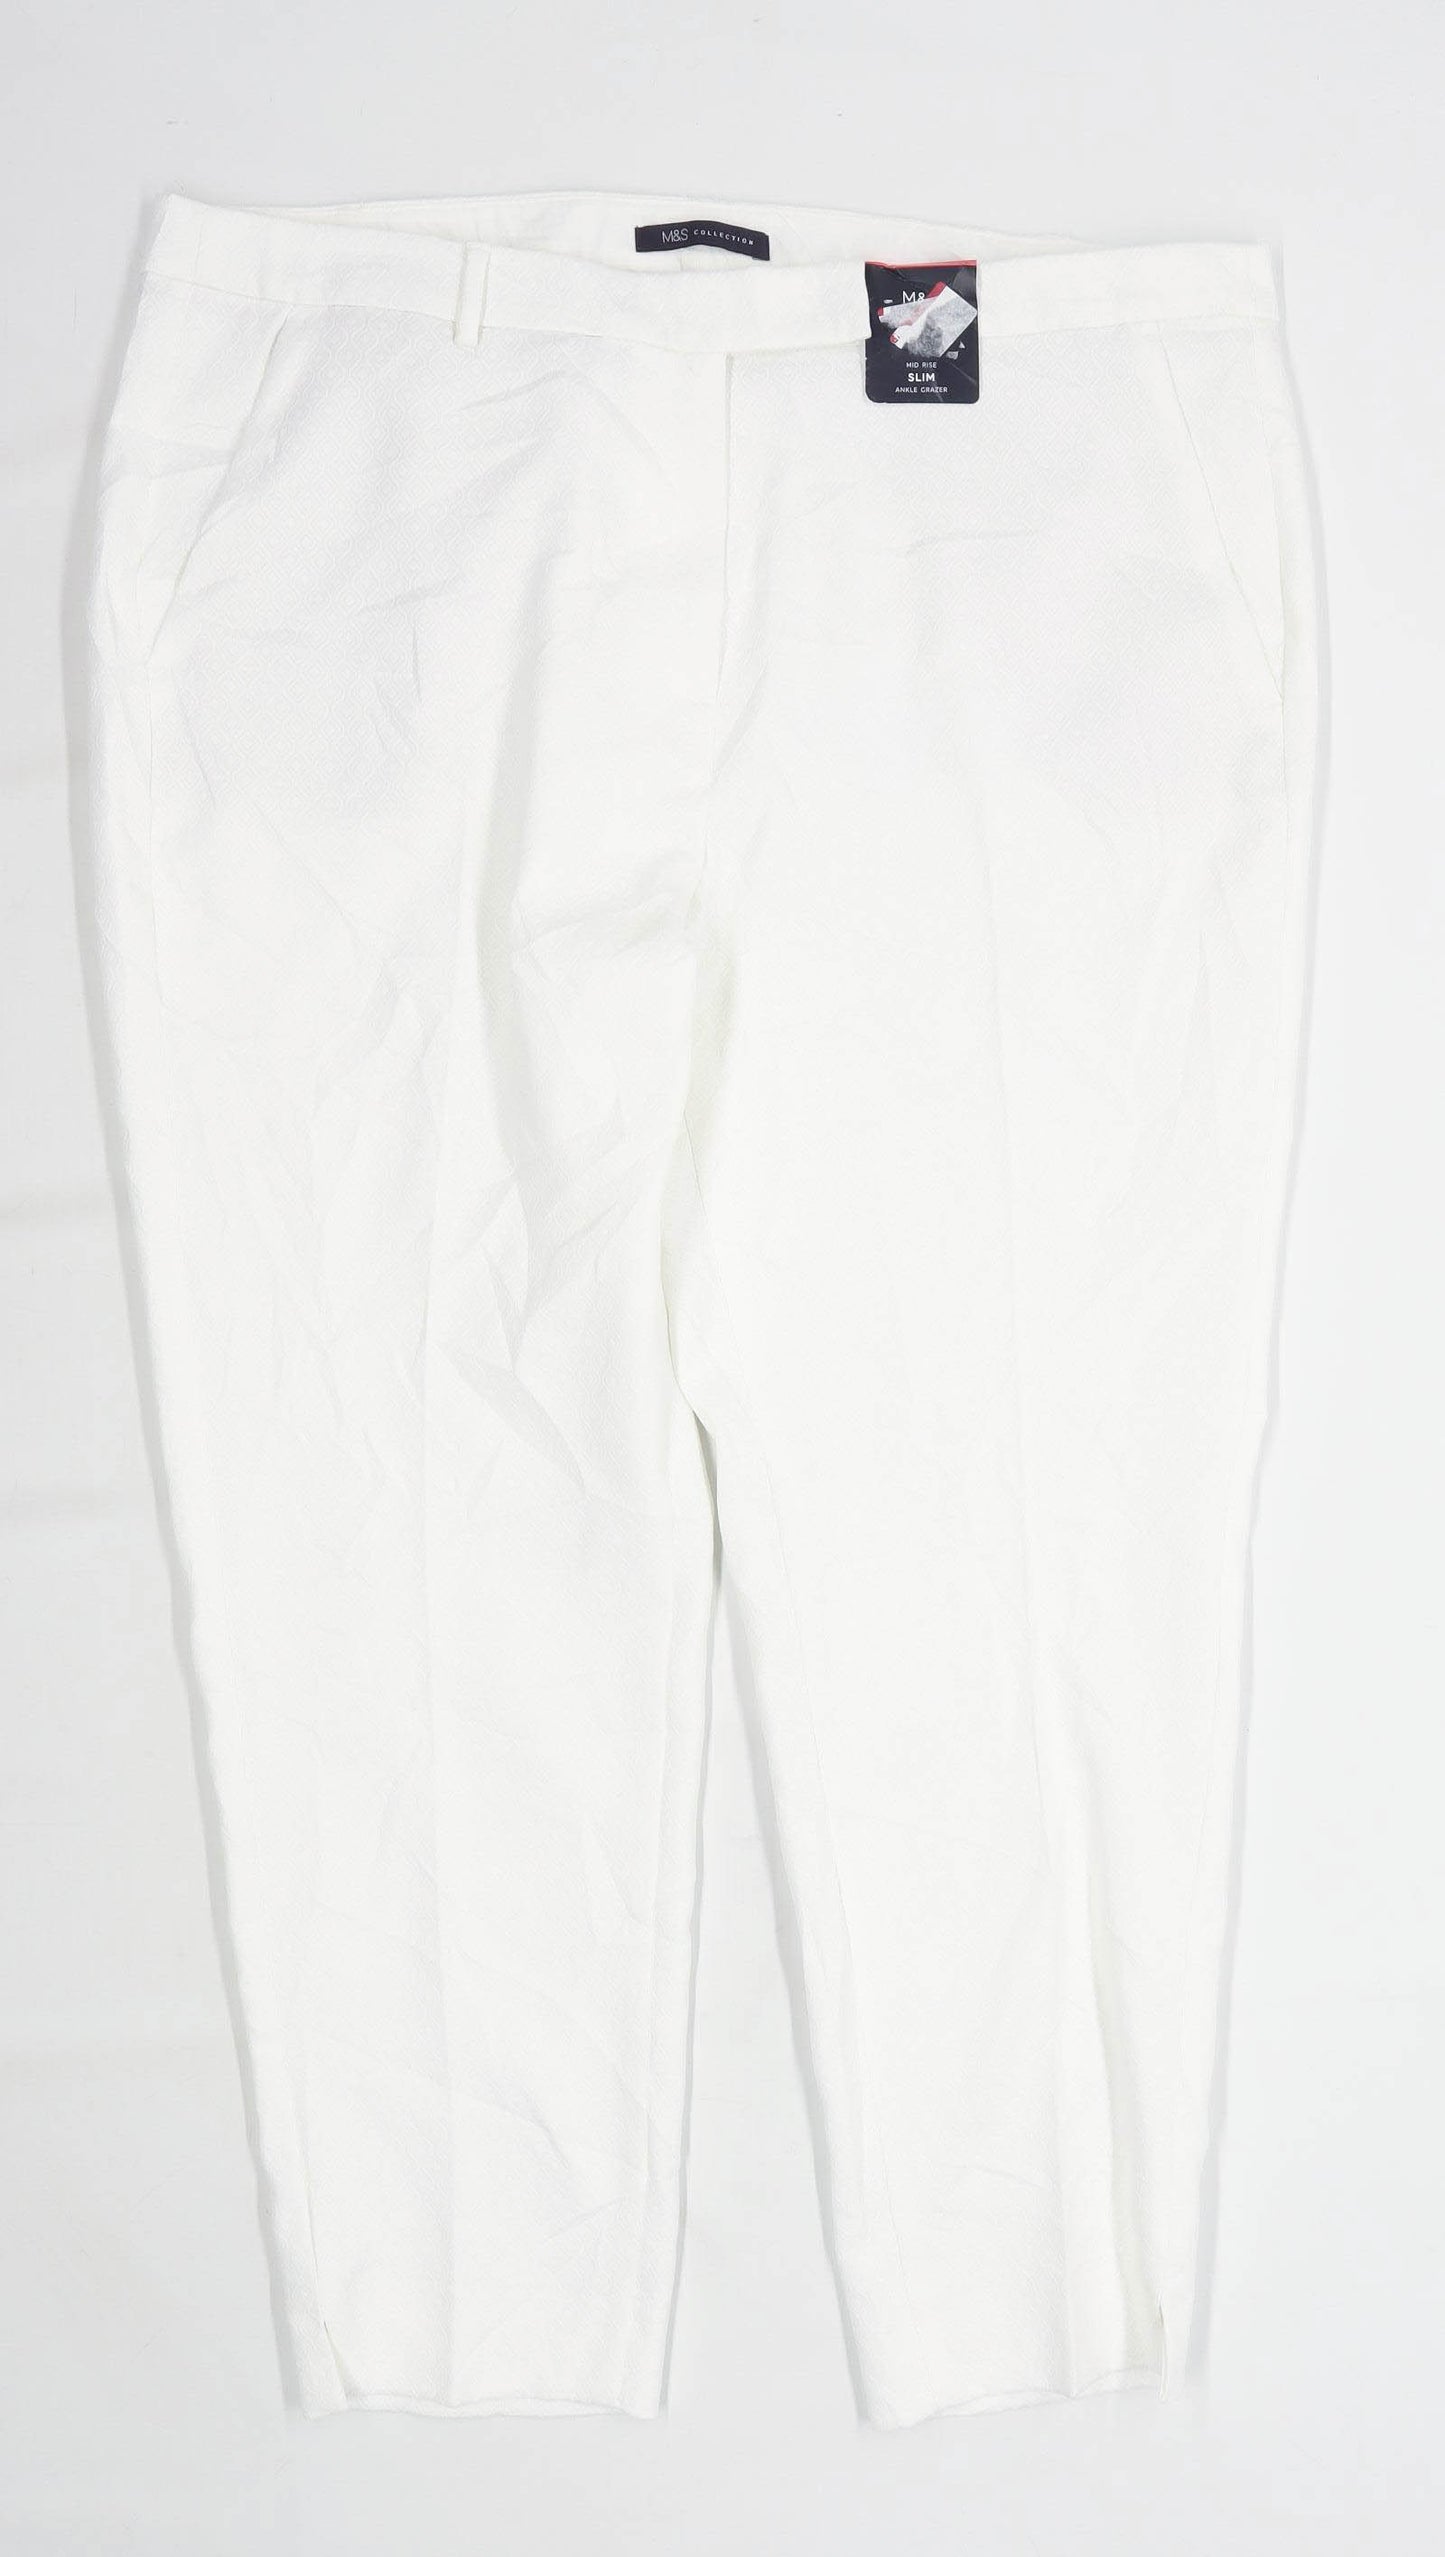 Womens Marks & Spencer White Trousers Size 18/L27